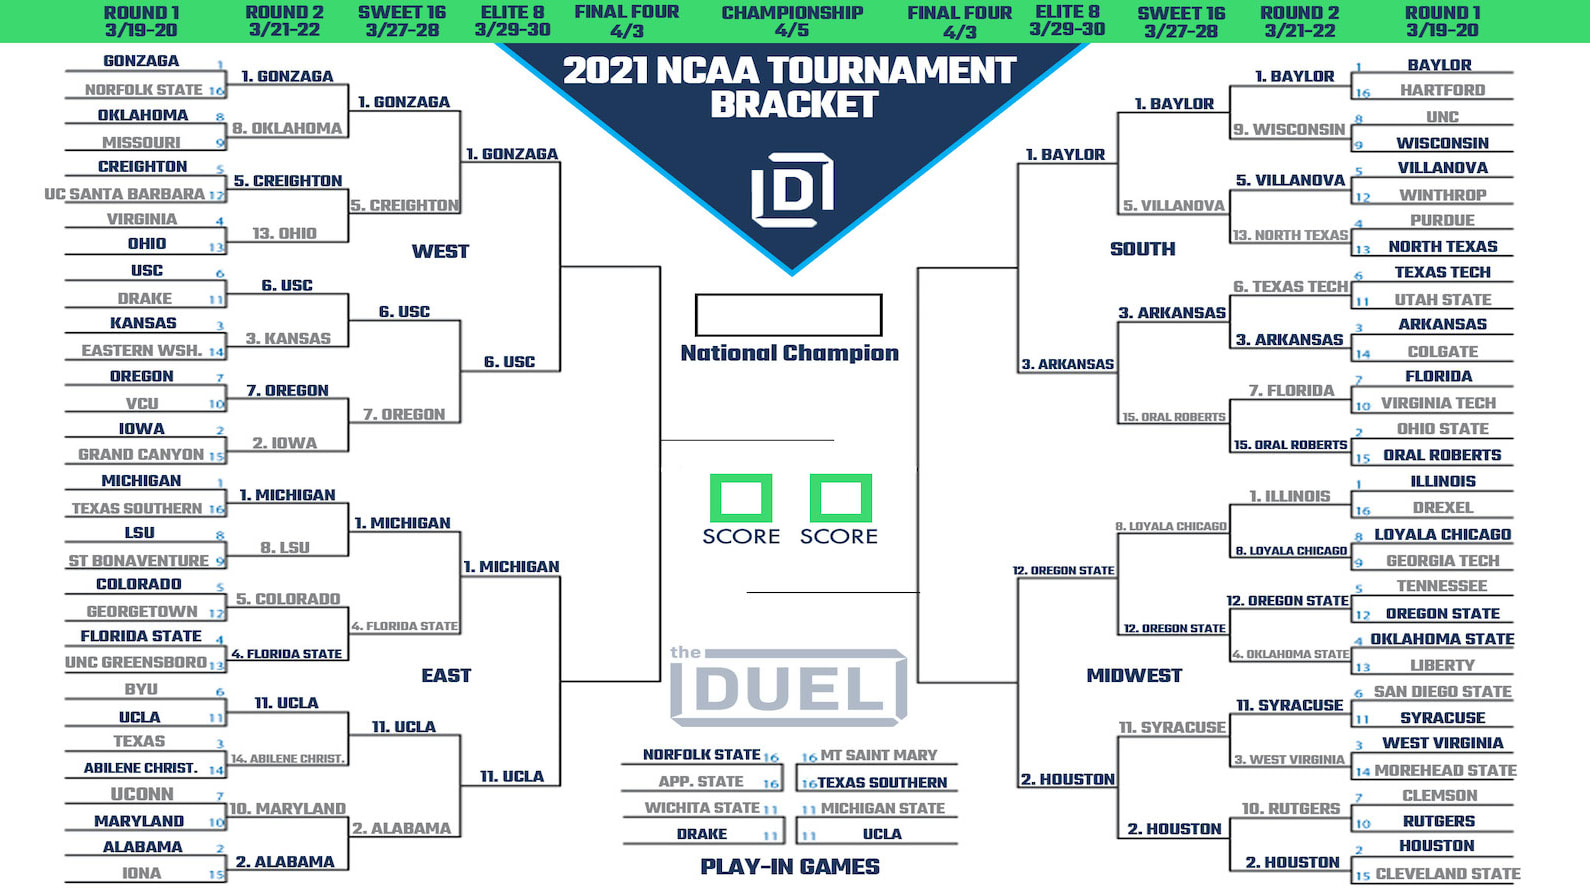 Updated March Madness Bracket for Elite 8 Printable NCAA Tournament